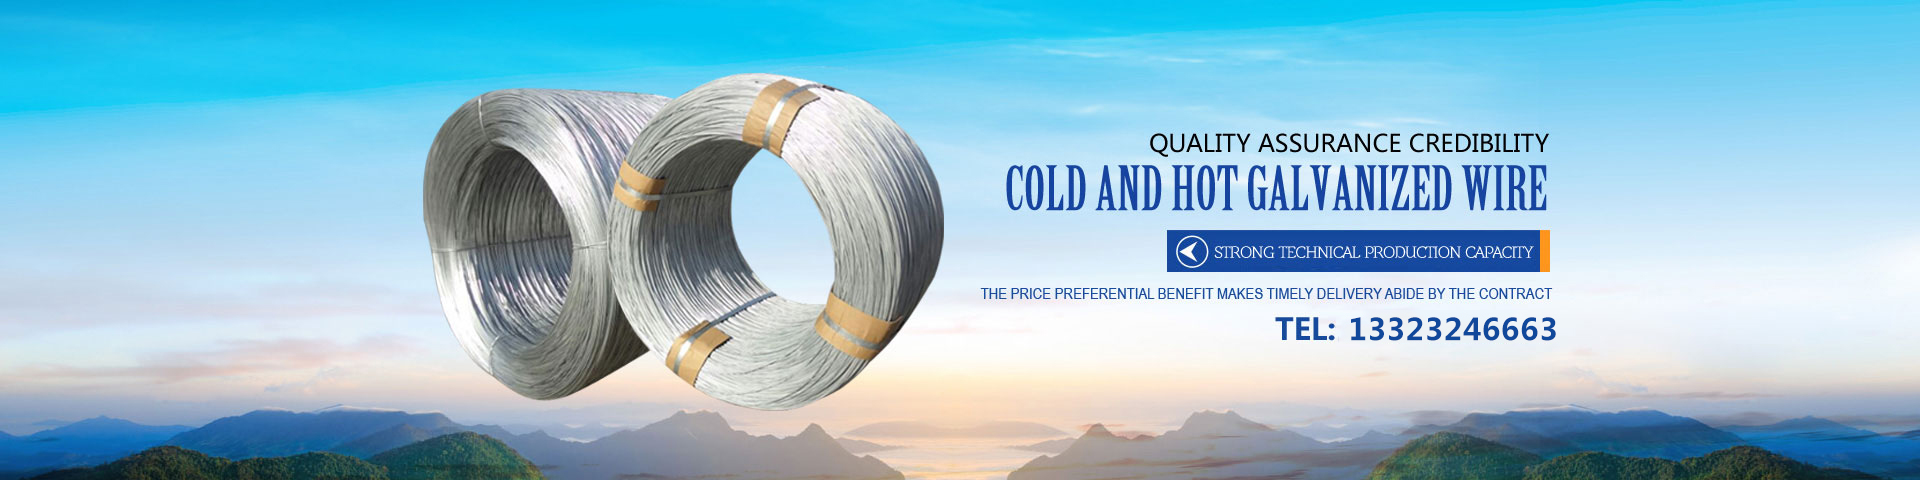 Cold and hot galvanized wire